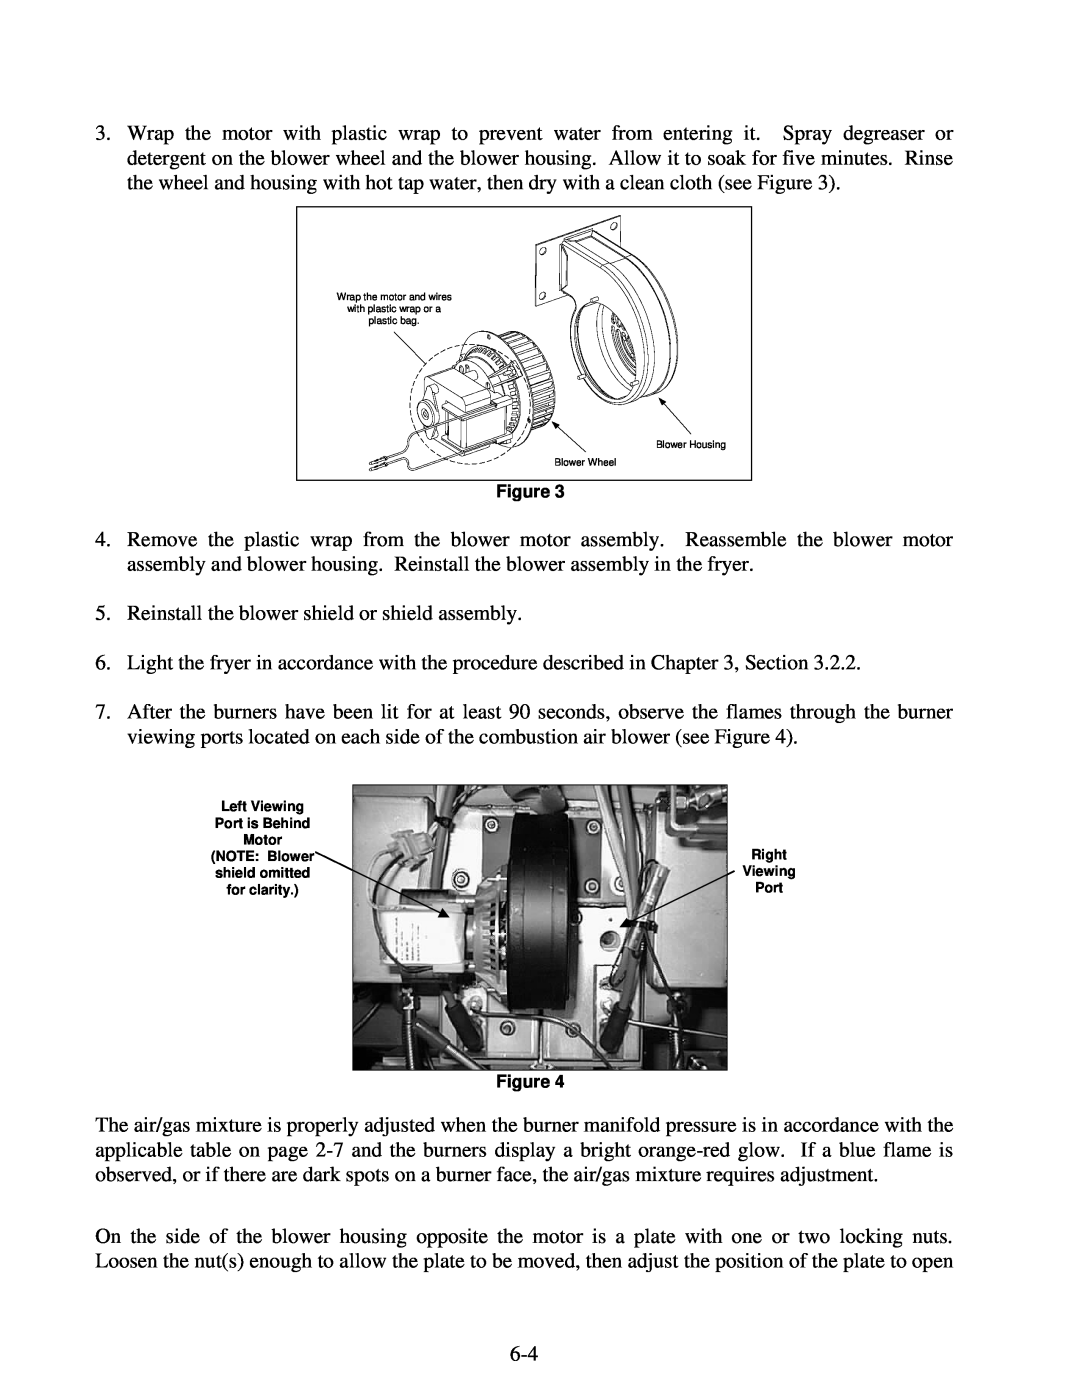 Frymaster Protector Series operation manual Reinstall the blower shield or shield assembly 